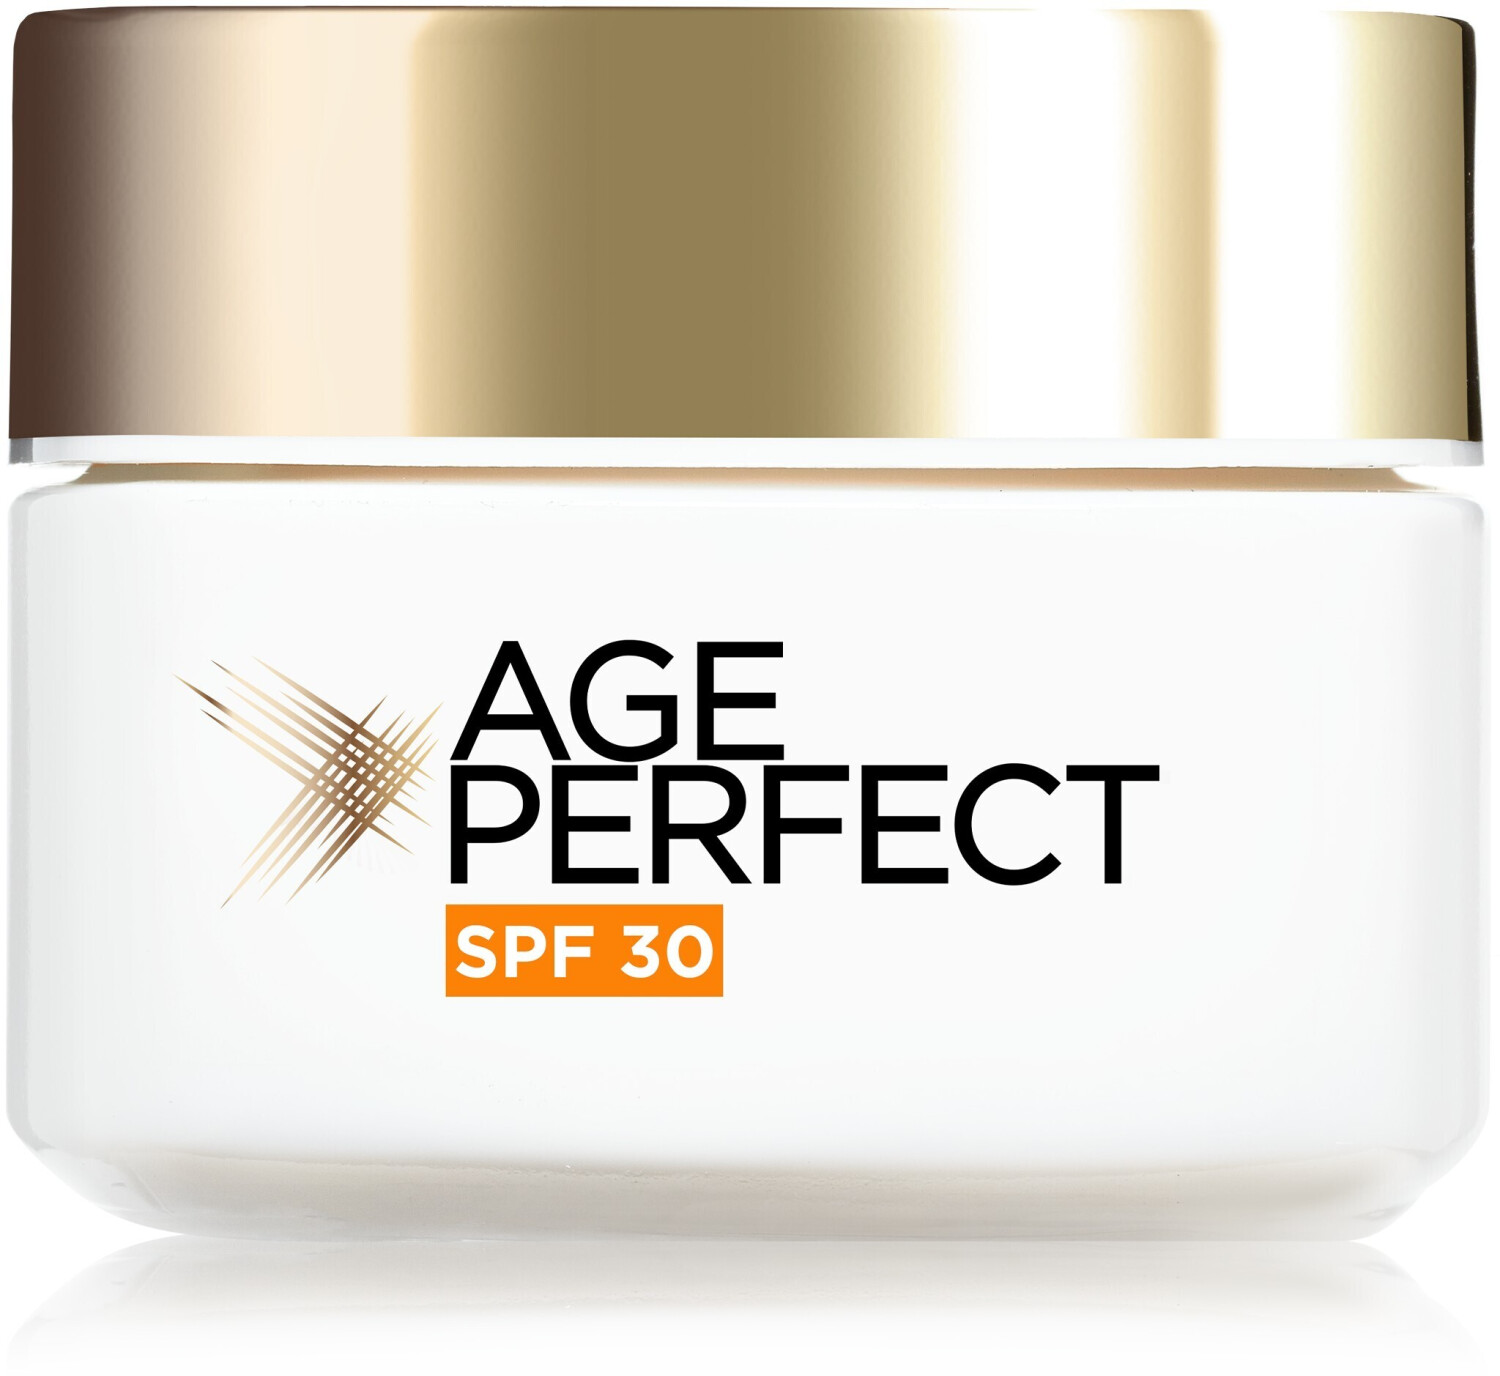 Photos - Other Cosmetics LOreal L'Oréal Age Perfect Collagen Expert Strengthening Day Cream SPF 30 